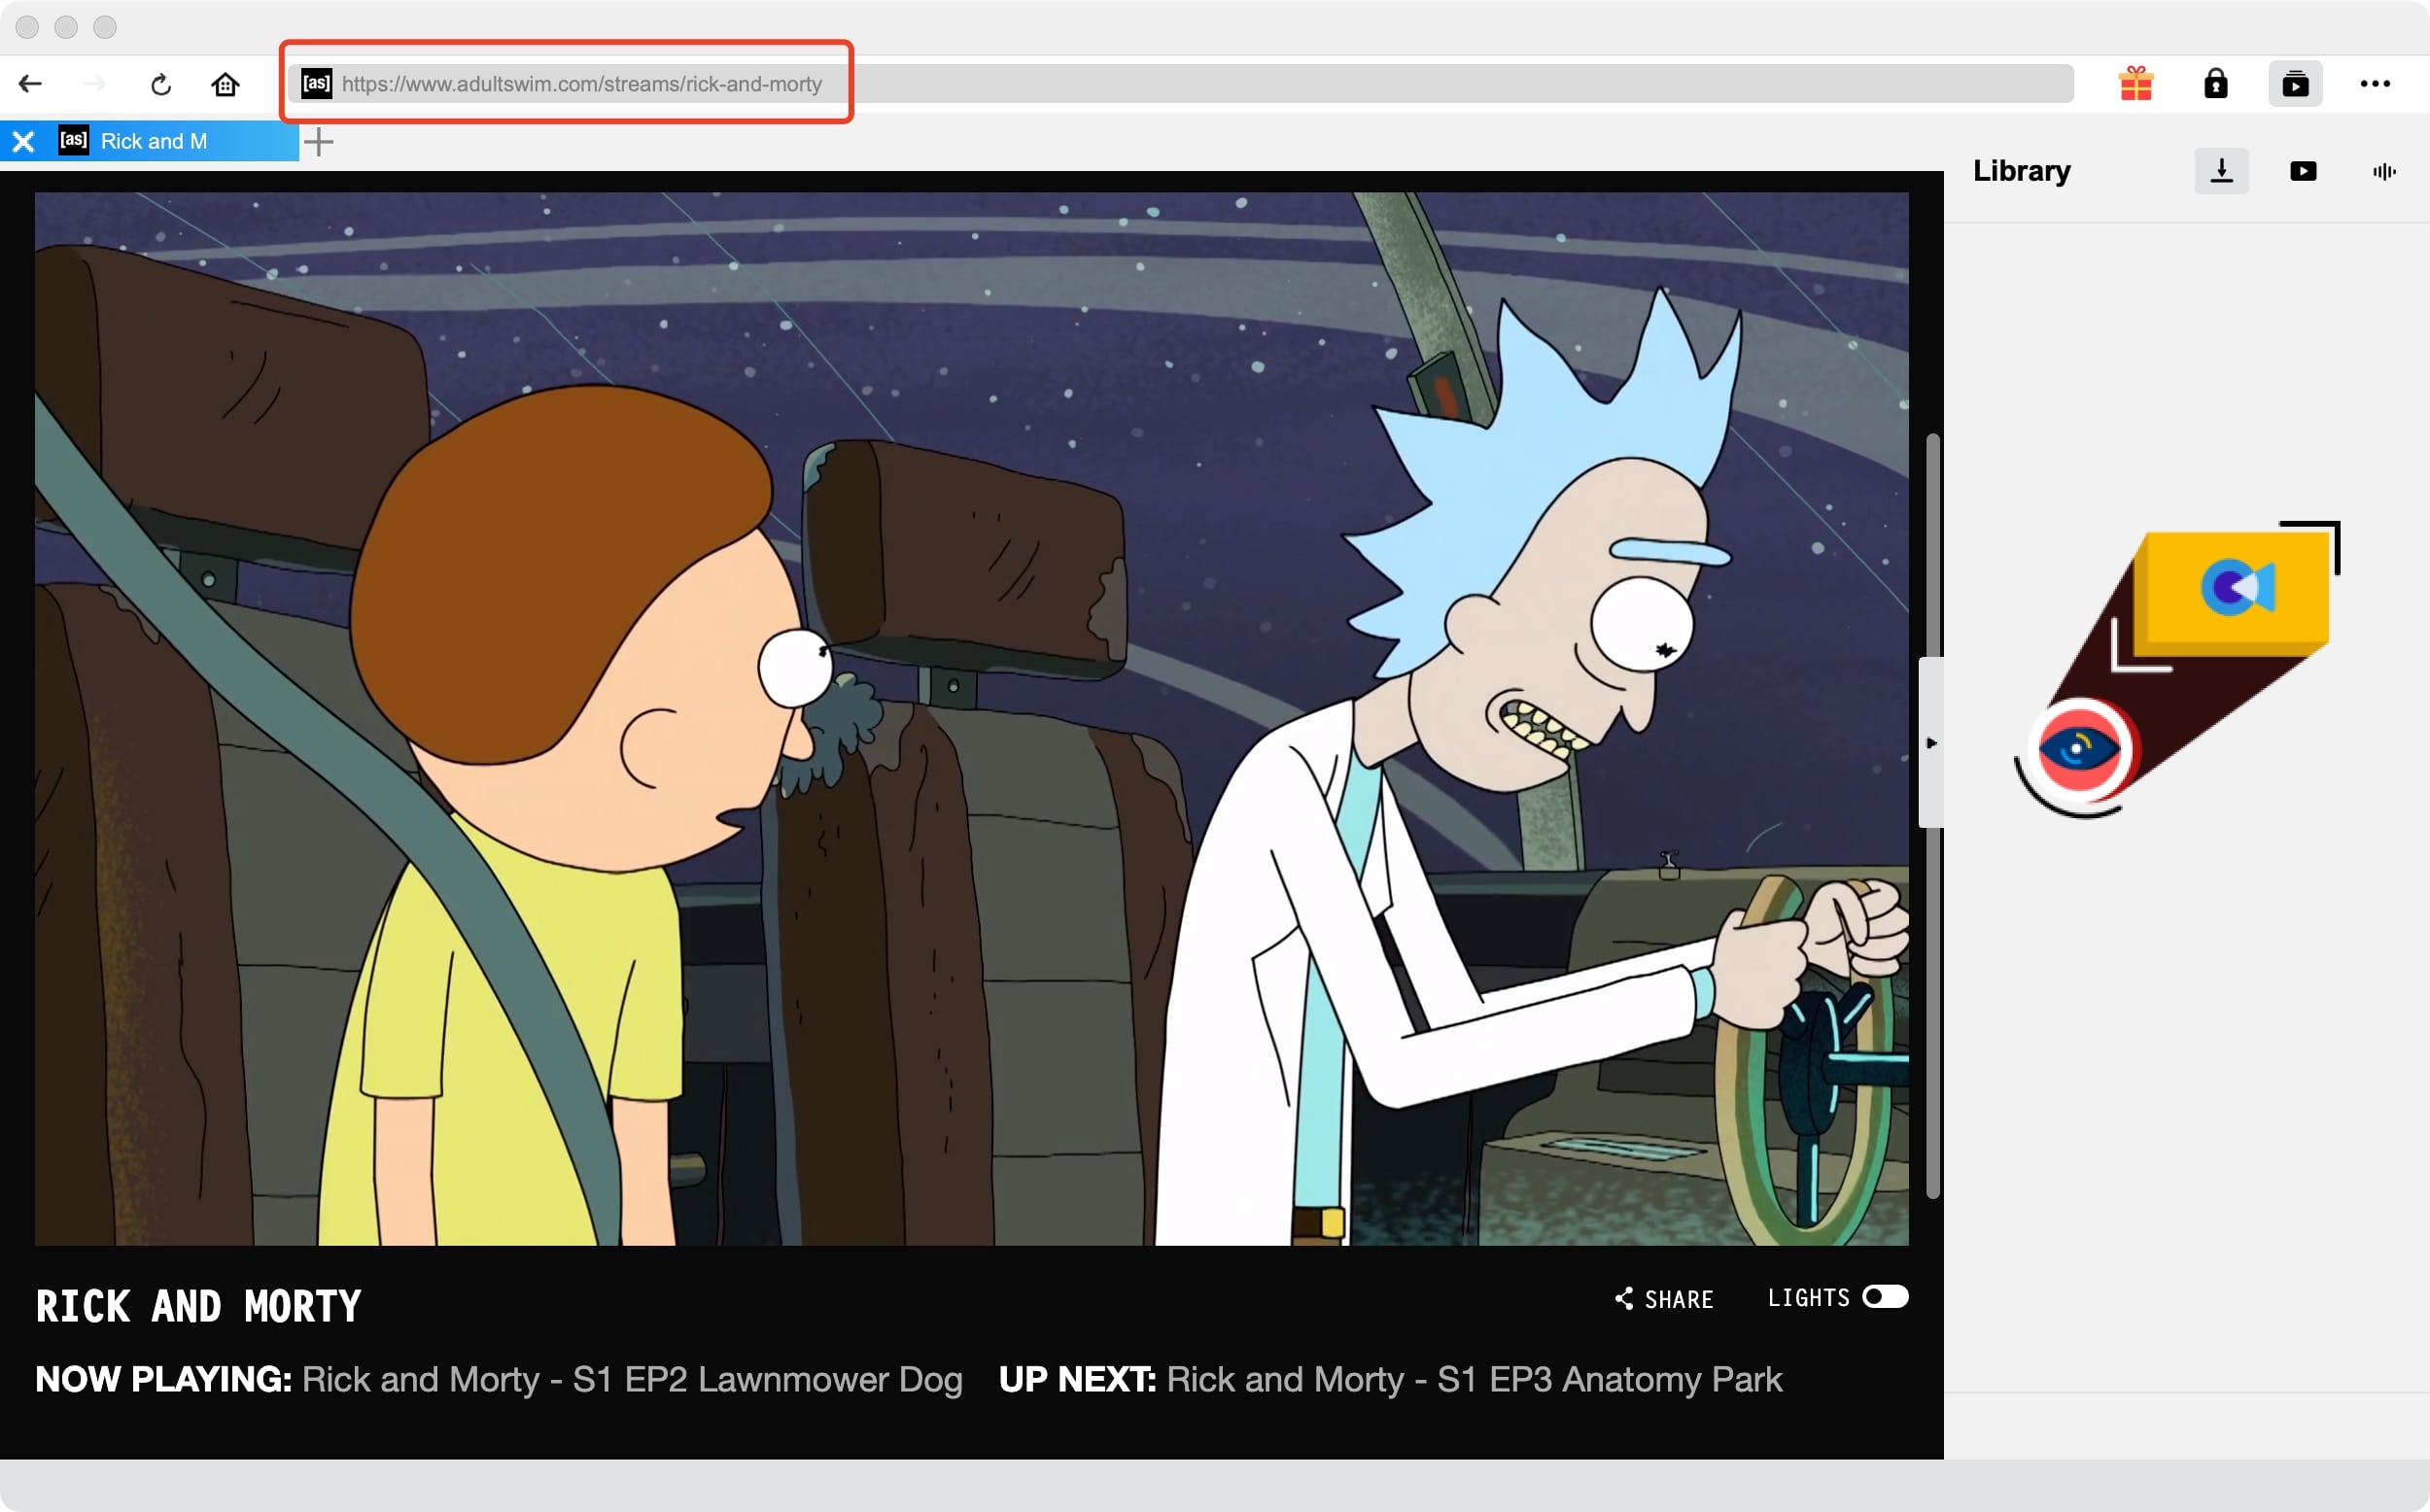  Watch-Rick-and-Morty-CleverGet-locate-video 